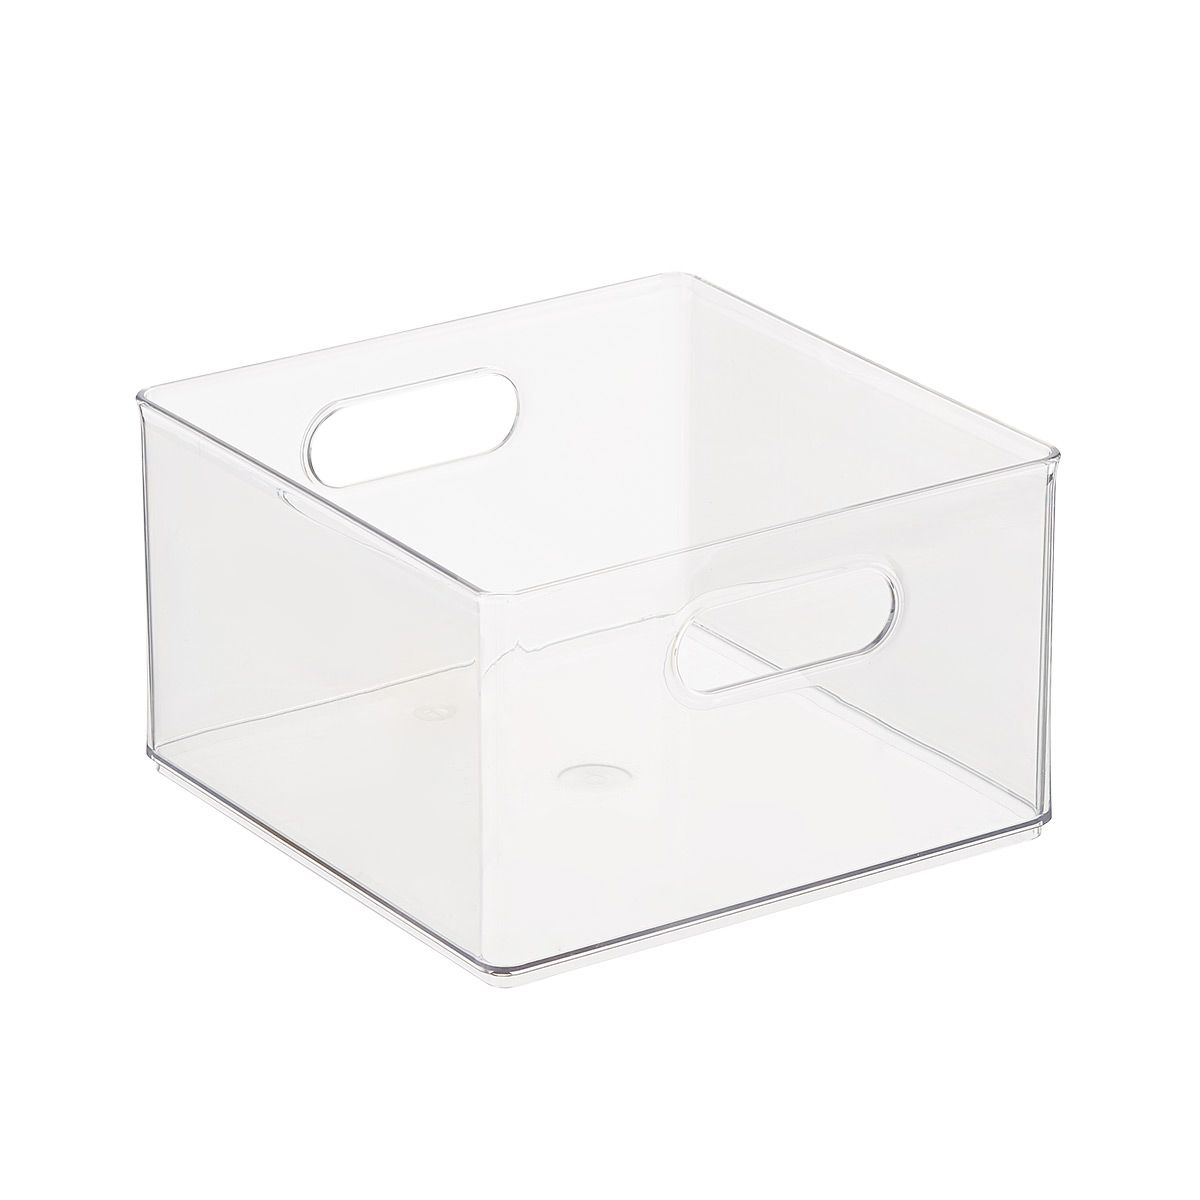 Case of 8 | The Container Store